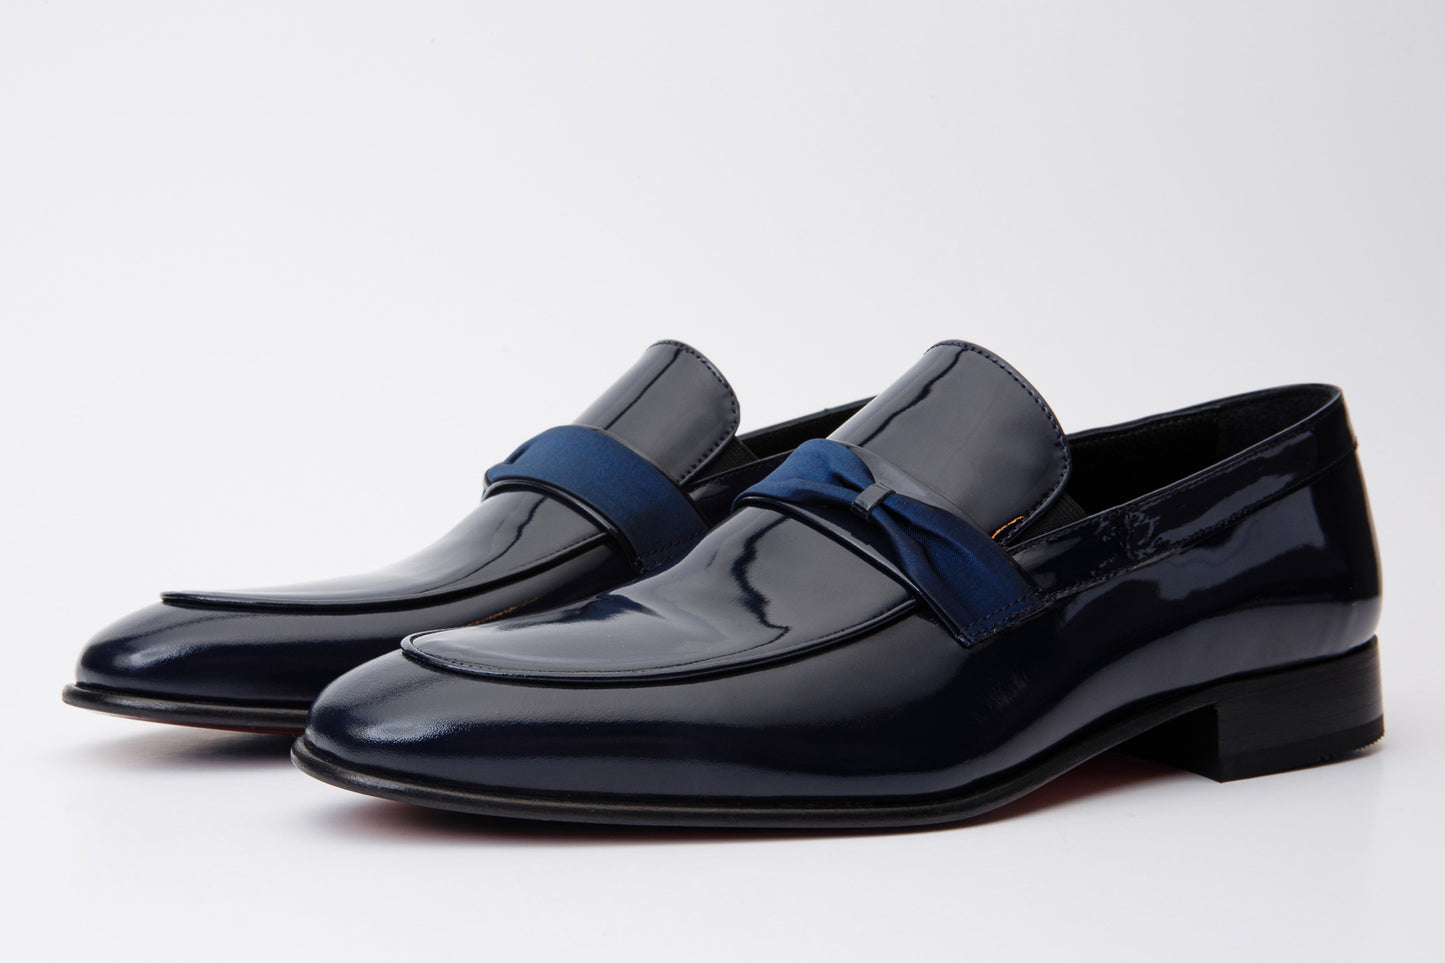 The Dodoma Navy Patent Leather Loafer Men Shoe